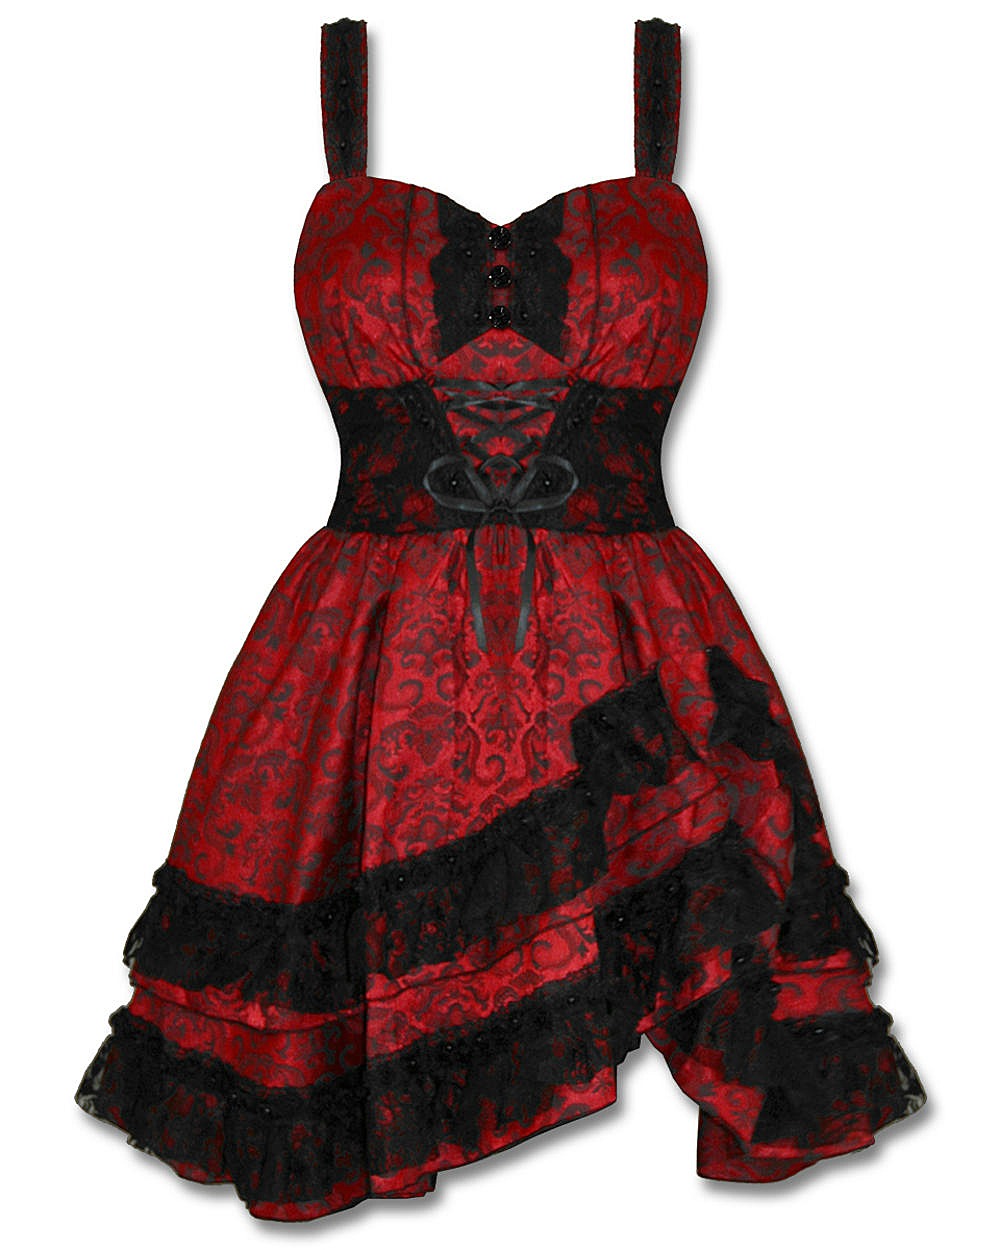 Red With Black Lace Dress And Popular Styles 2017